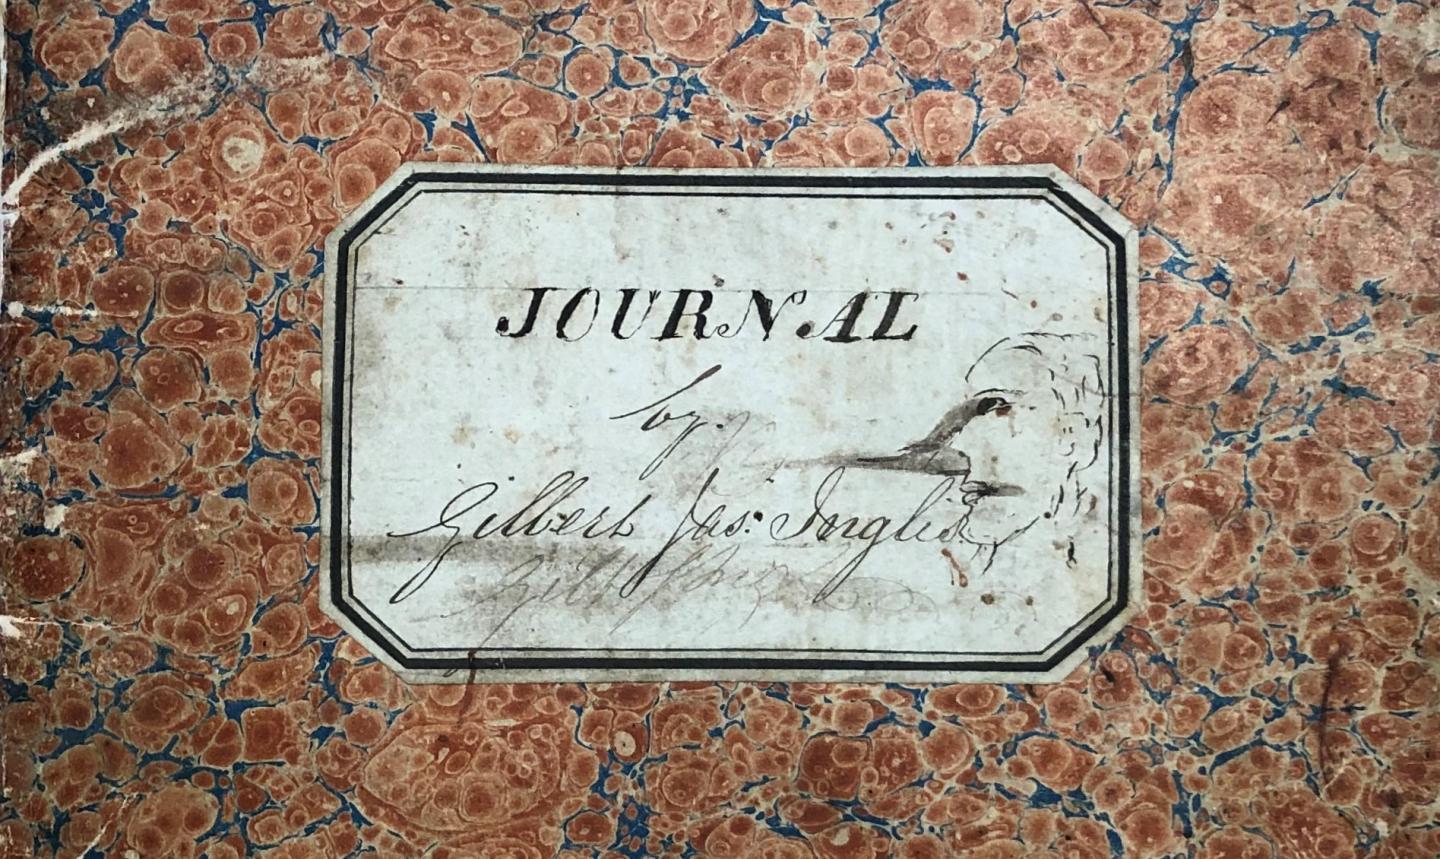 Cover of the personal journal written by Gilbert James Inglis